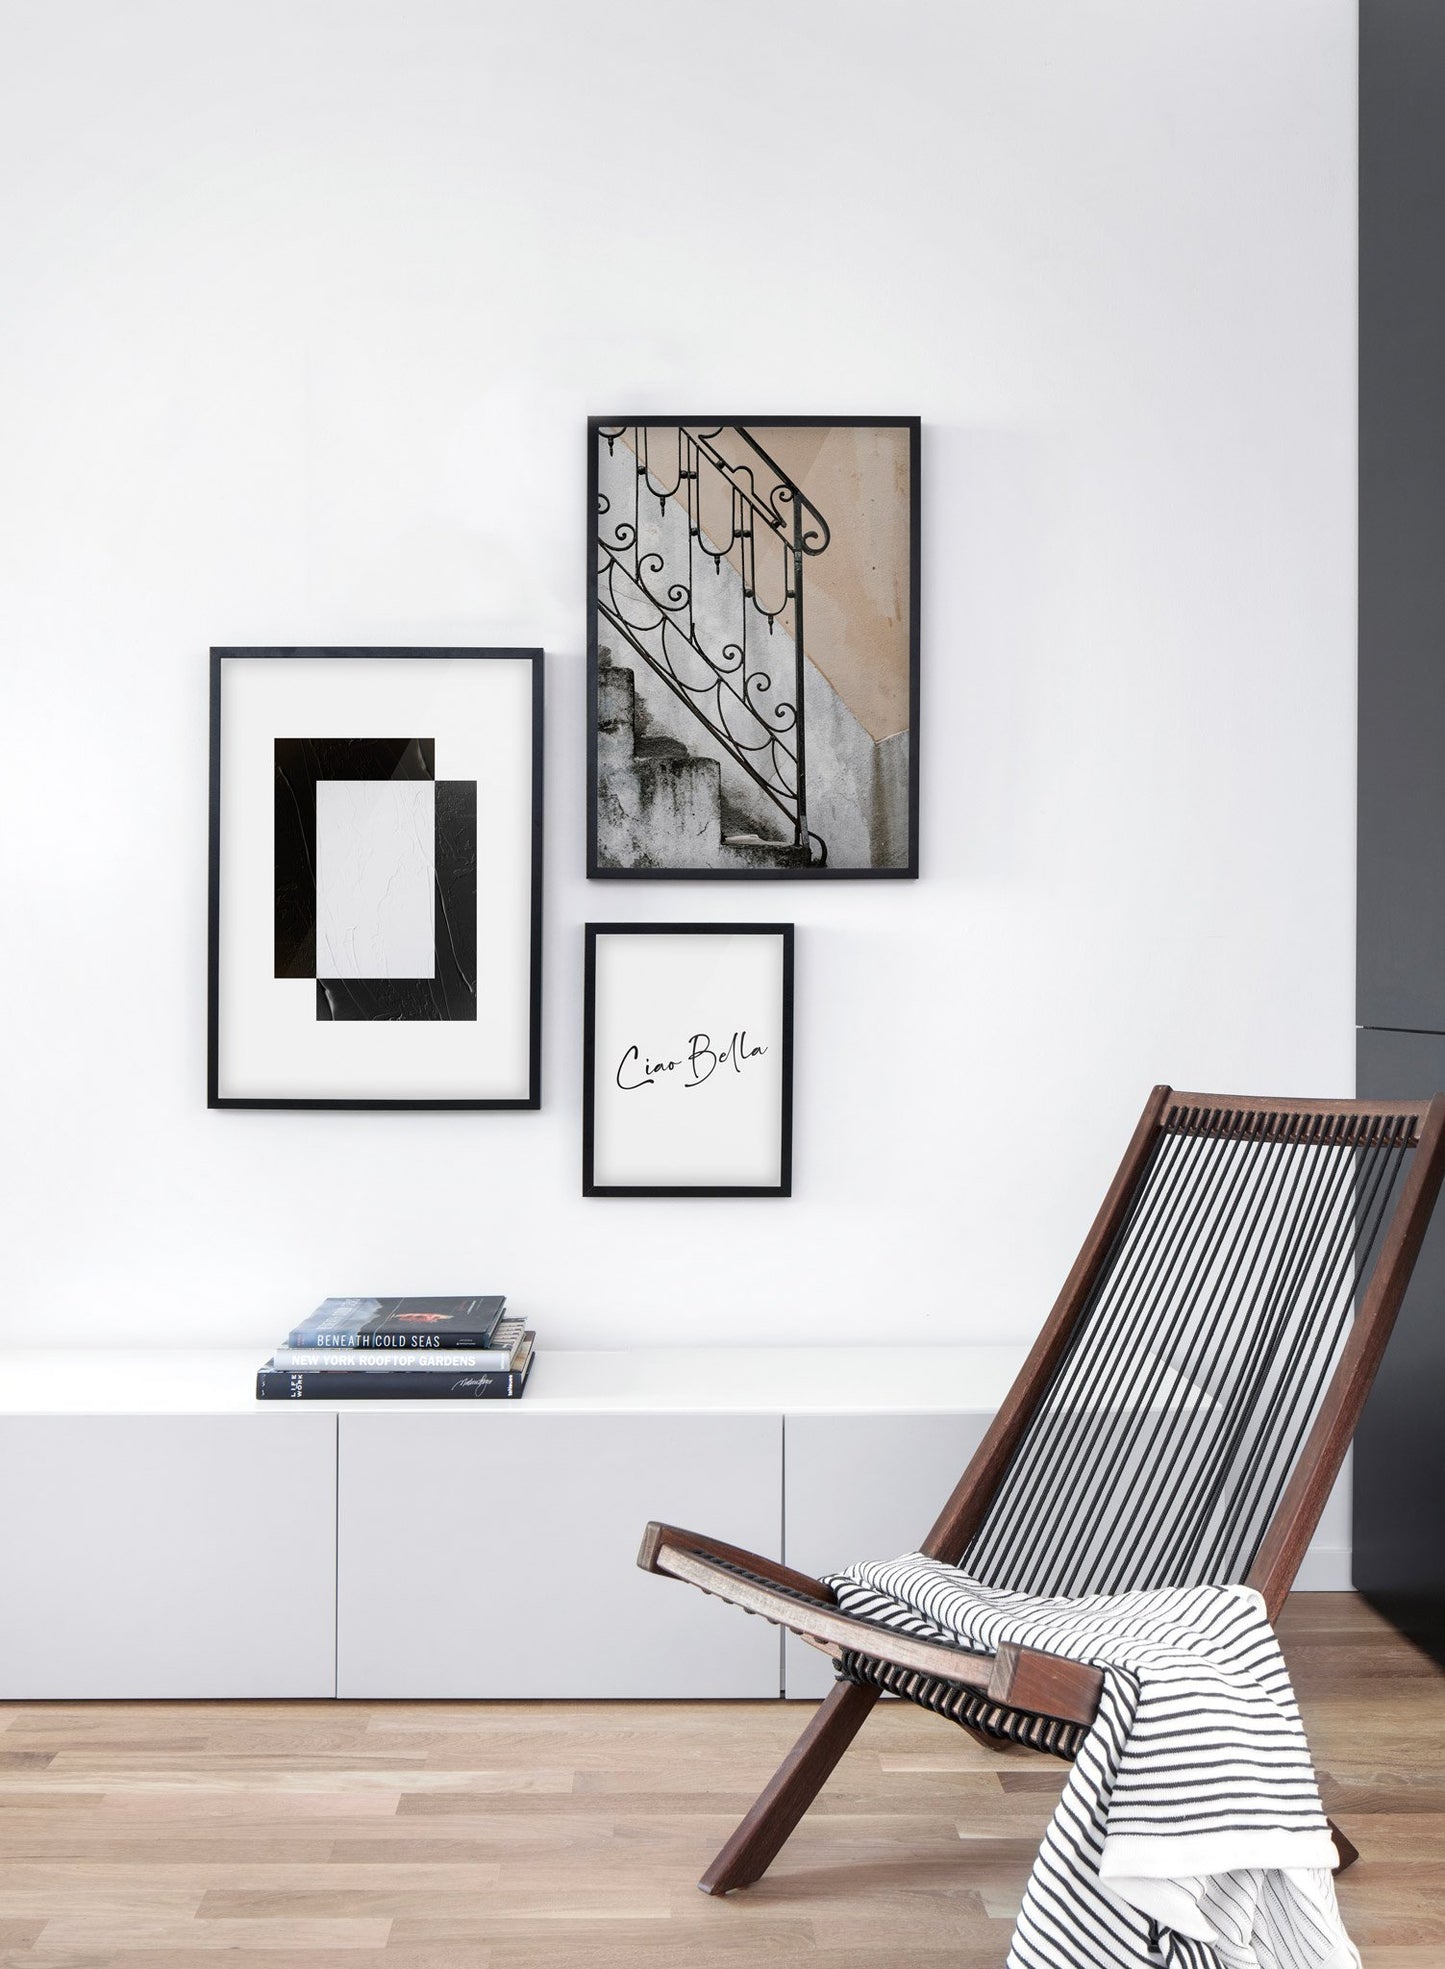 Stairs modern minimalist photography poster by Opposite Wall - Living room - Trio